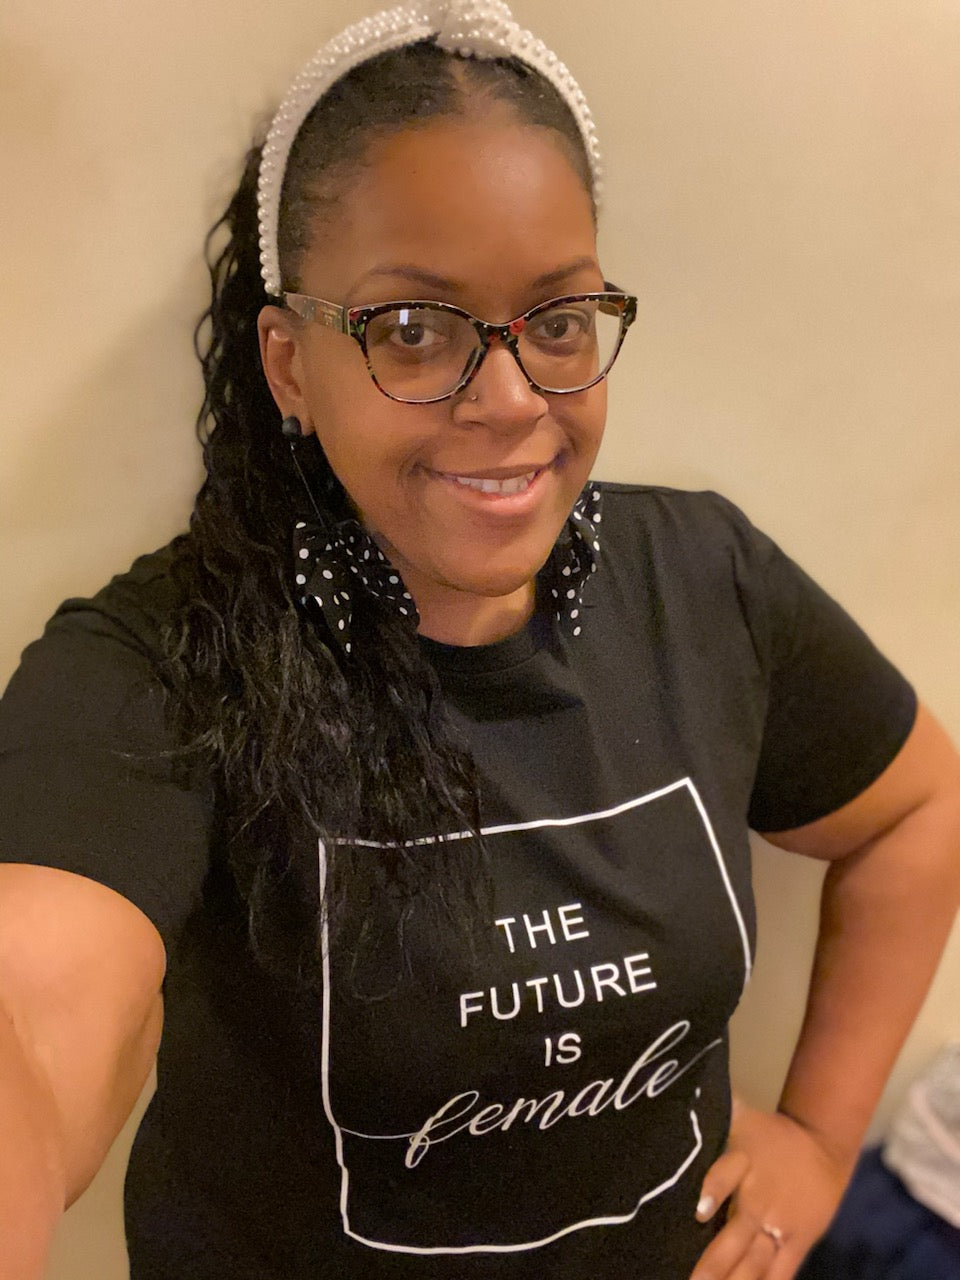 The Future Is Female Unisex Sophisticated Tee T-Shirt